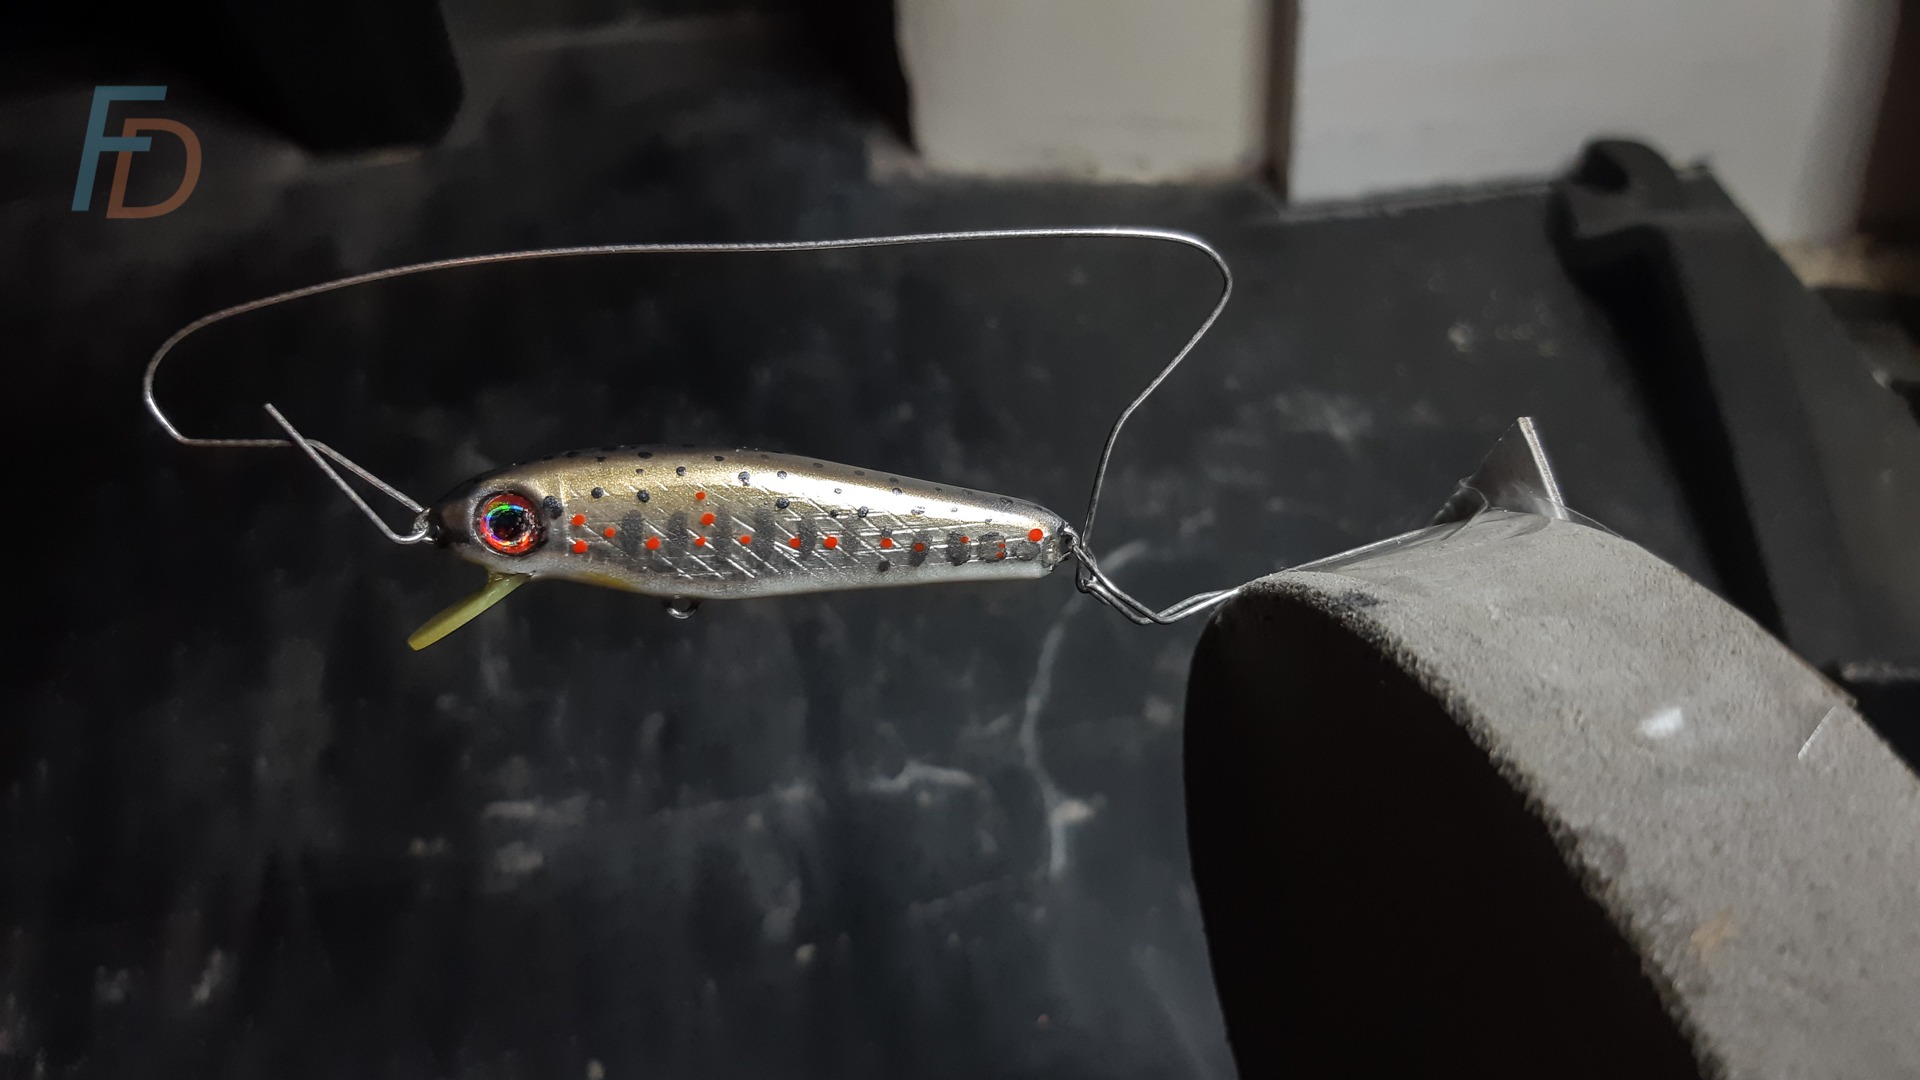 How to Make Fishing Lures: Confessions of a 1st-time Lure Builder